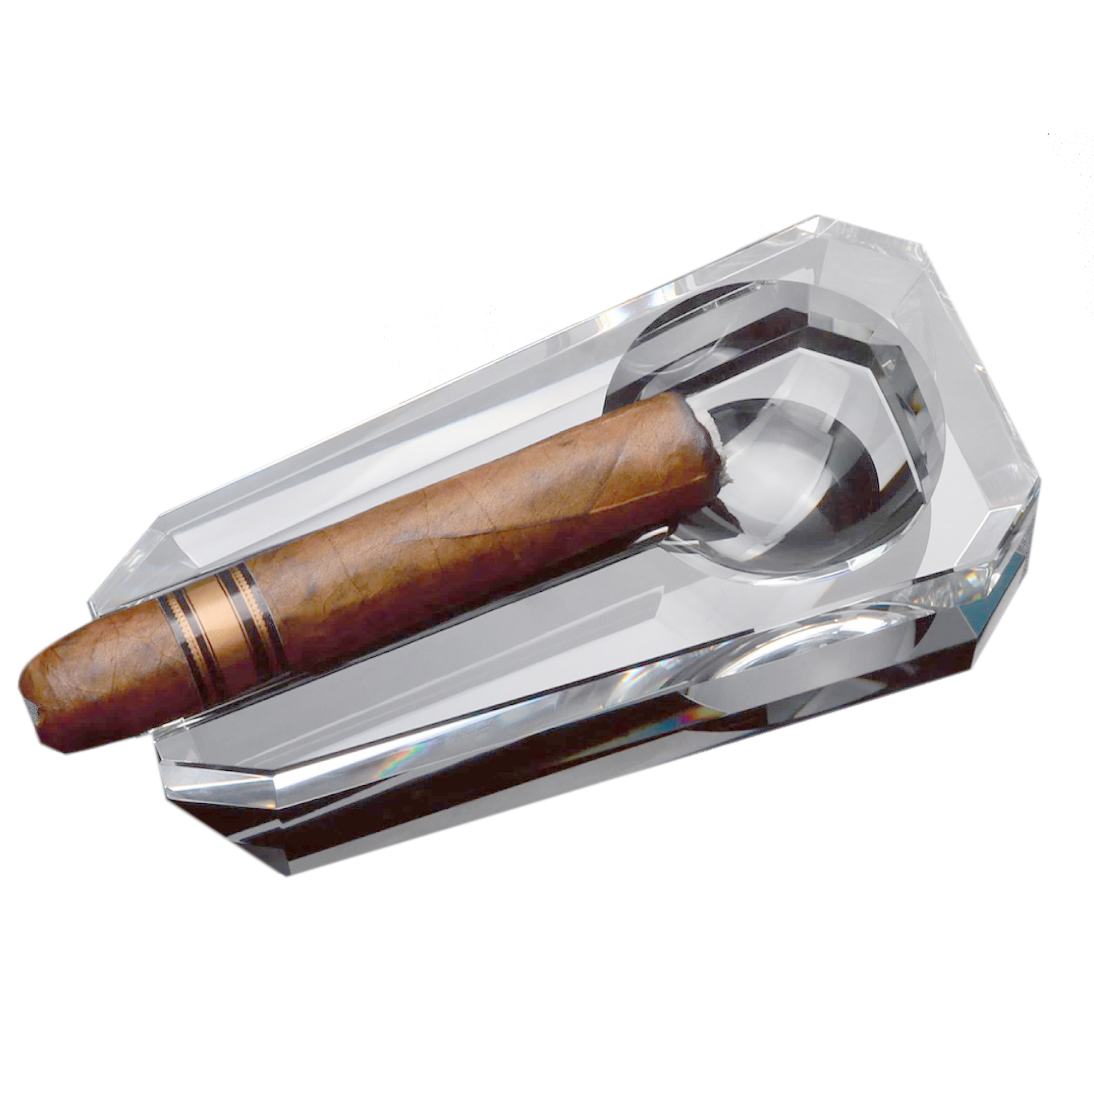 Ashtray for Cigars and Pipes from Solid Crystal Glass - Classic 1